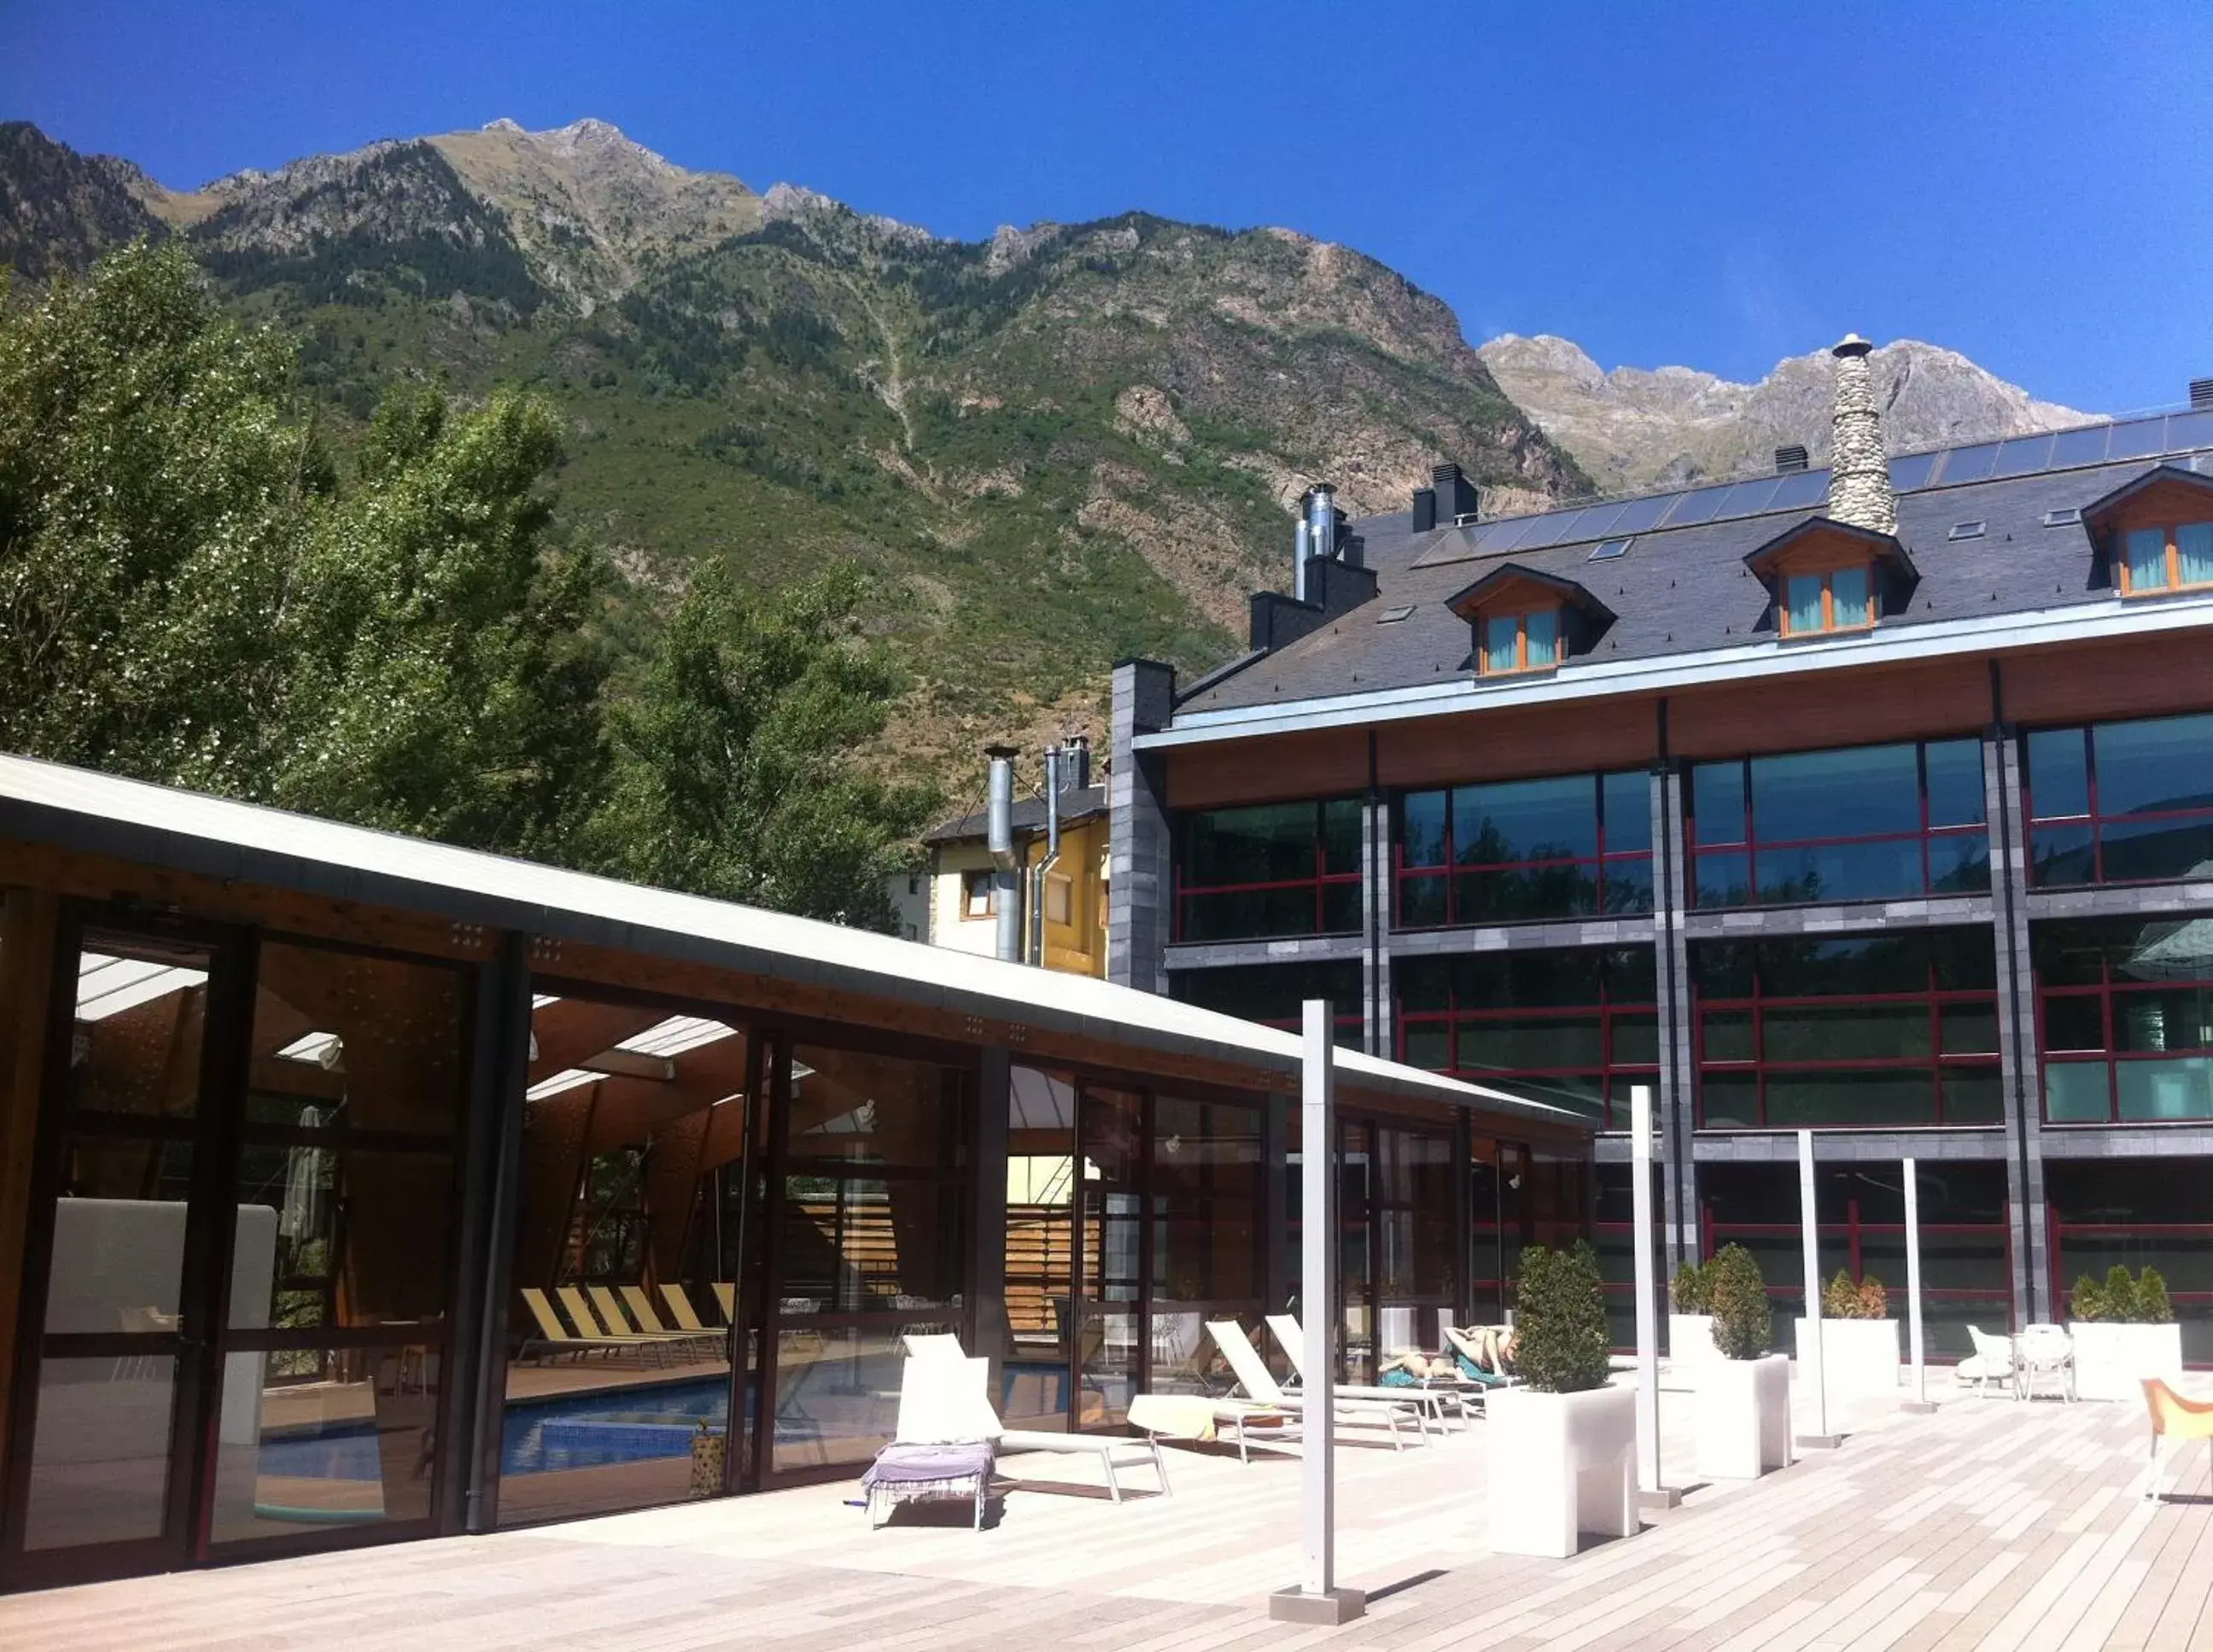 Property Building in SOMMOS Hotel Aneto